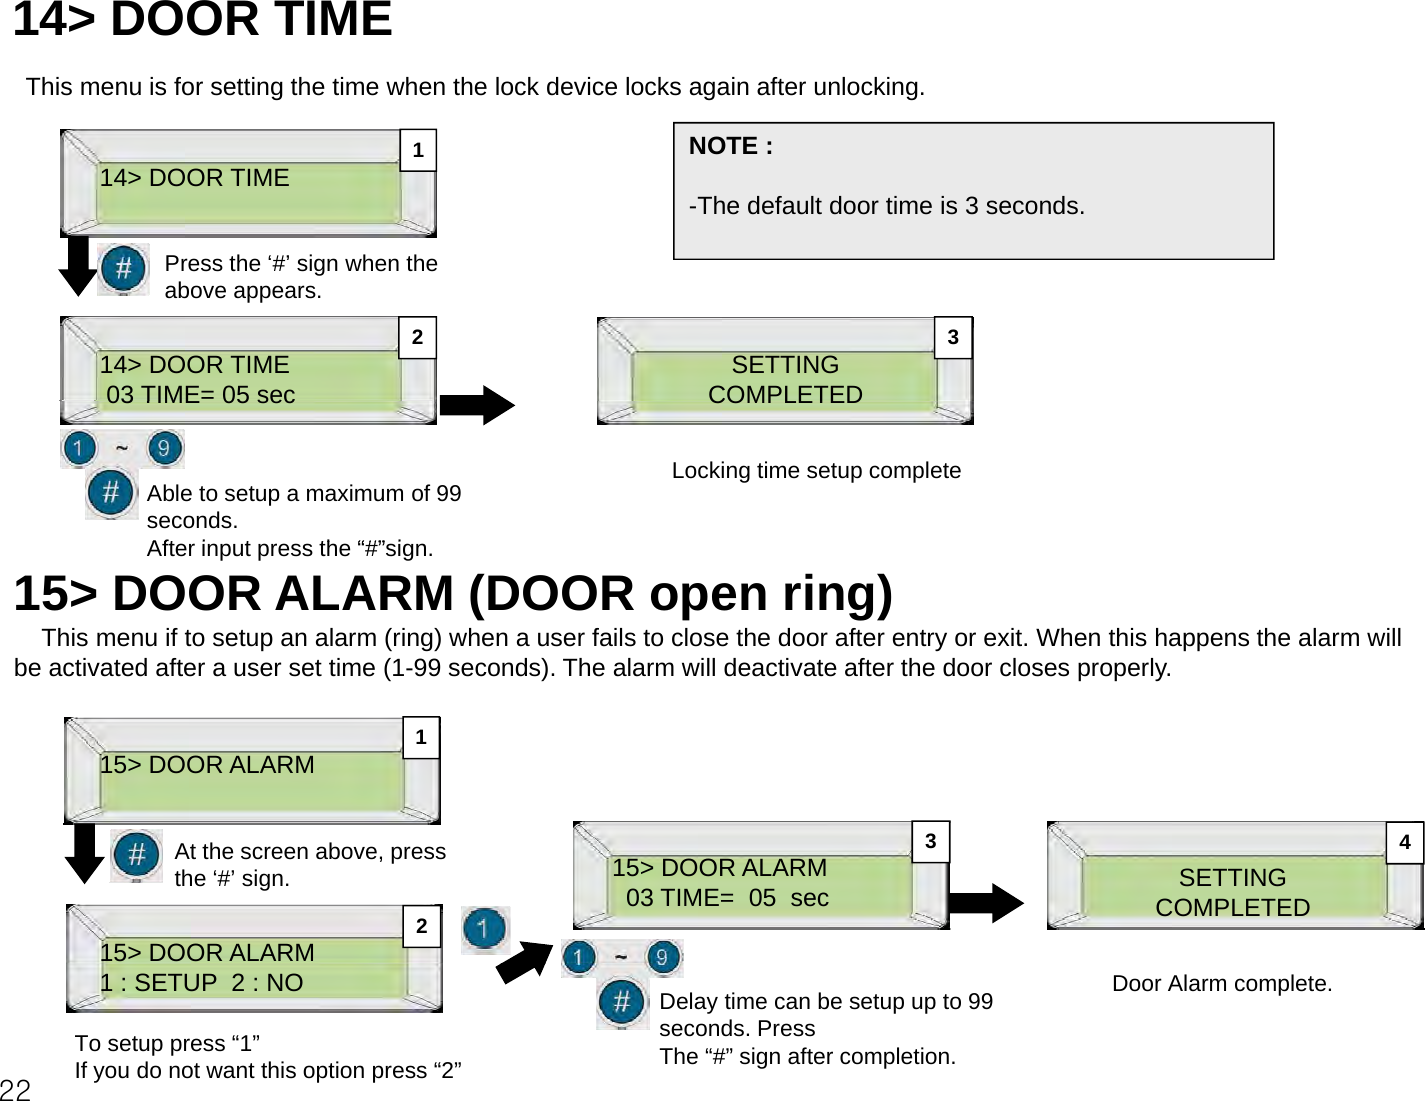 14&gt; DOOR TIME This menu is for setting the time when the lock device locks again after unlocking.14&gt; DOOR TIMEPress the‘#’sign when theNOTE :-The default door time is 3 seconds.1Press the # sign when the above appears.14&gt; DOOR TIME03 TIME=05 secSETTINGCOMPLETED2 303 TIME 05 secAble to setup a maximum of 99 seconds.Aft i t th “#” iCOMPLETED Locking time setup completeAfter input press the “#”sign.15&gt; DOOR ALARM (DOOR open ring)This menu if to setup an alarm (ring) when a user fails to close the door after entry or exit. When this happens the alarm will be activated after a user set time (1-99 seconds). The alarm will deactivate after the door closes properly.15&gt; DOOR ALARM 1At the screen above, press the ‘#’ sign.15&gt; DOOR ALARM15&gt; DOOR ALARM03 TIME=  05  sec SETTINGCOMPLETED 234221 : SETUP  2 : NOTo setup press “1”If you do not want this option press “2”Delay time can be setup up to 99 seconds. PressThe “#” sign after completion.Door Alarm complete.